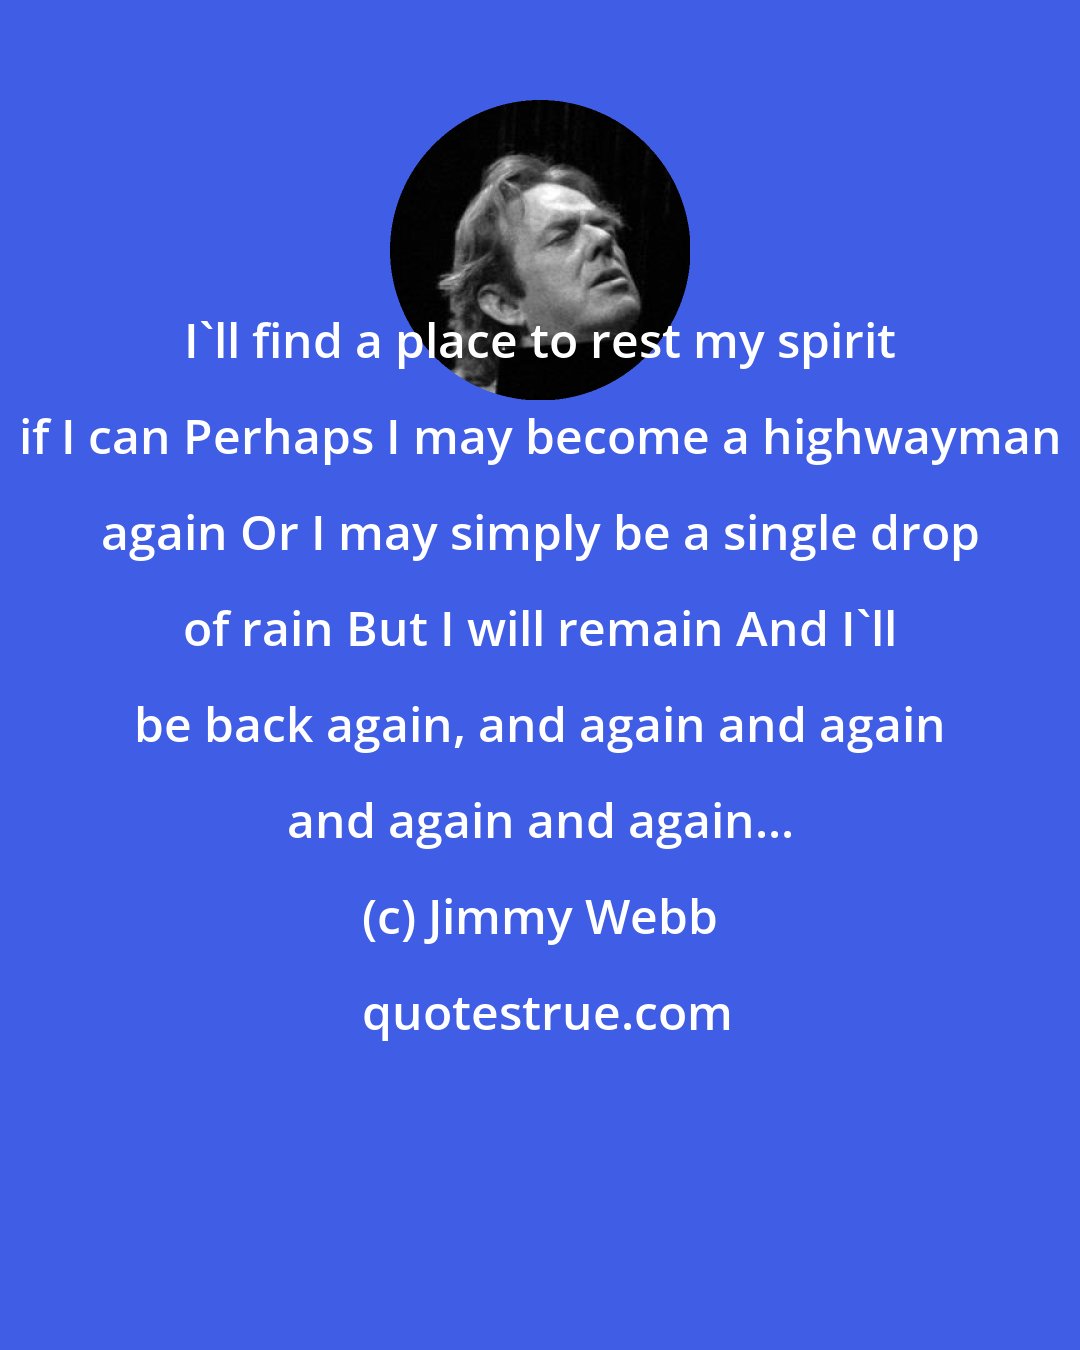 Jimmy Webb: I'll find a place to rest my spirit if I can Perhaps I may become a highwayman again Or I may simply be a single drop of rain But I will remain And I'll be back again, and again and again and again and again...